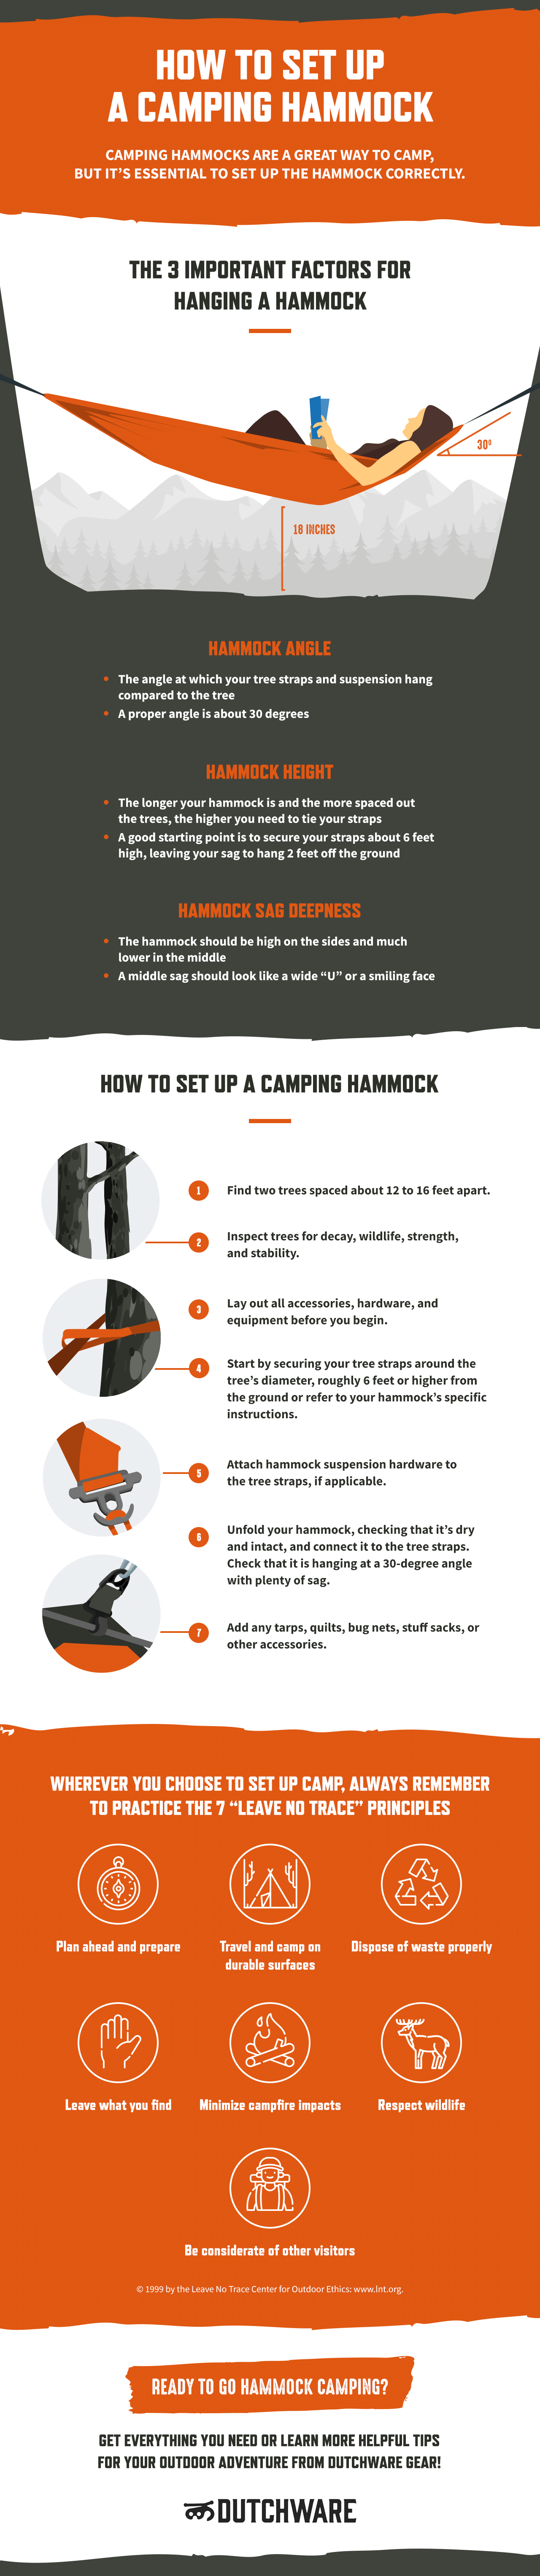 how to set up a camping hammock